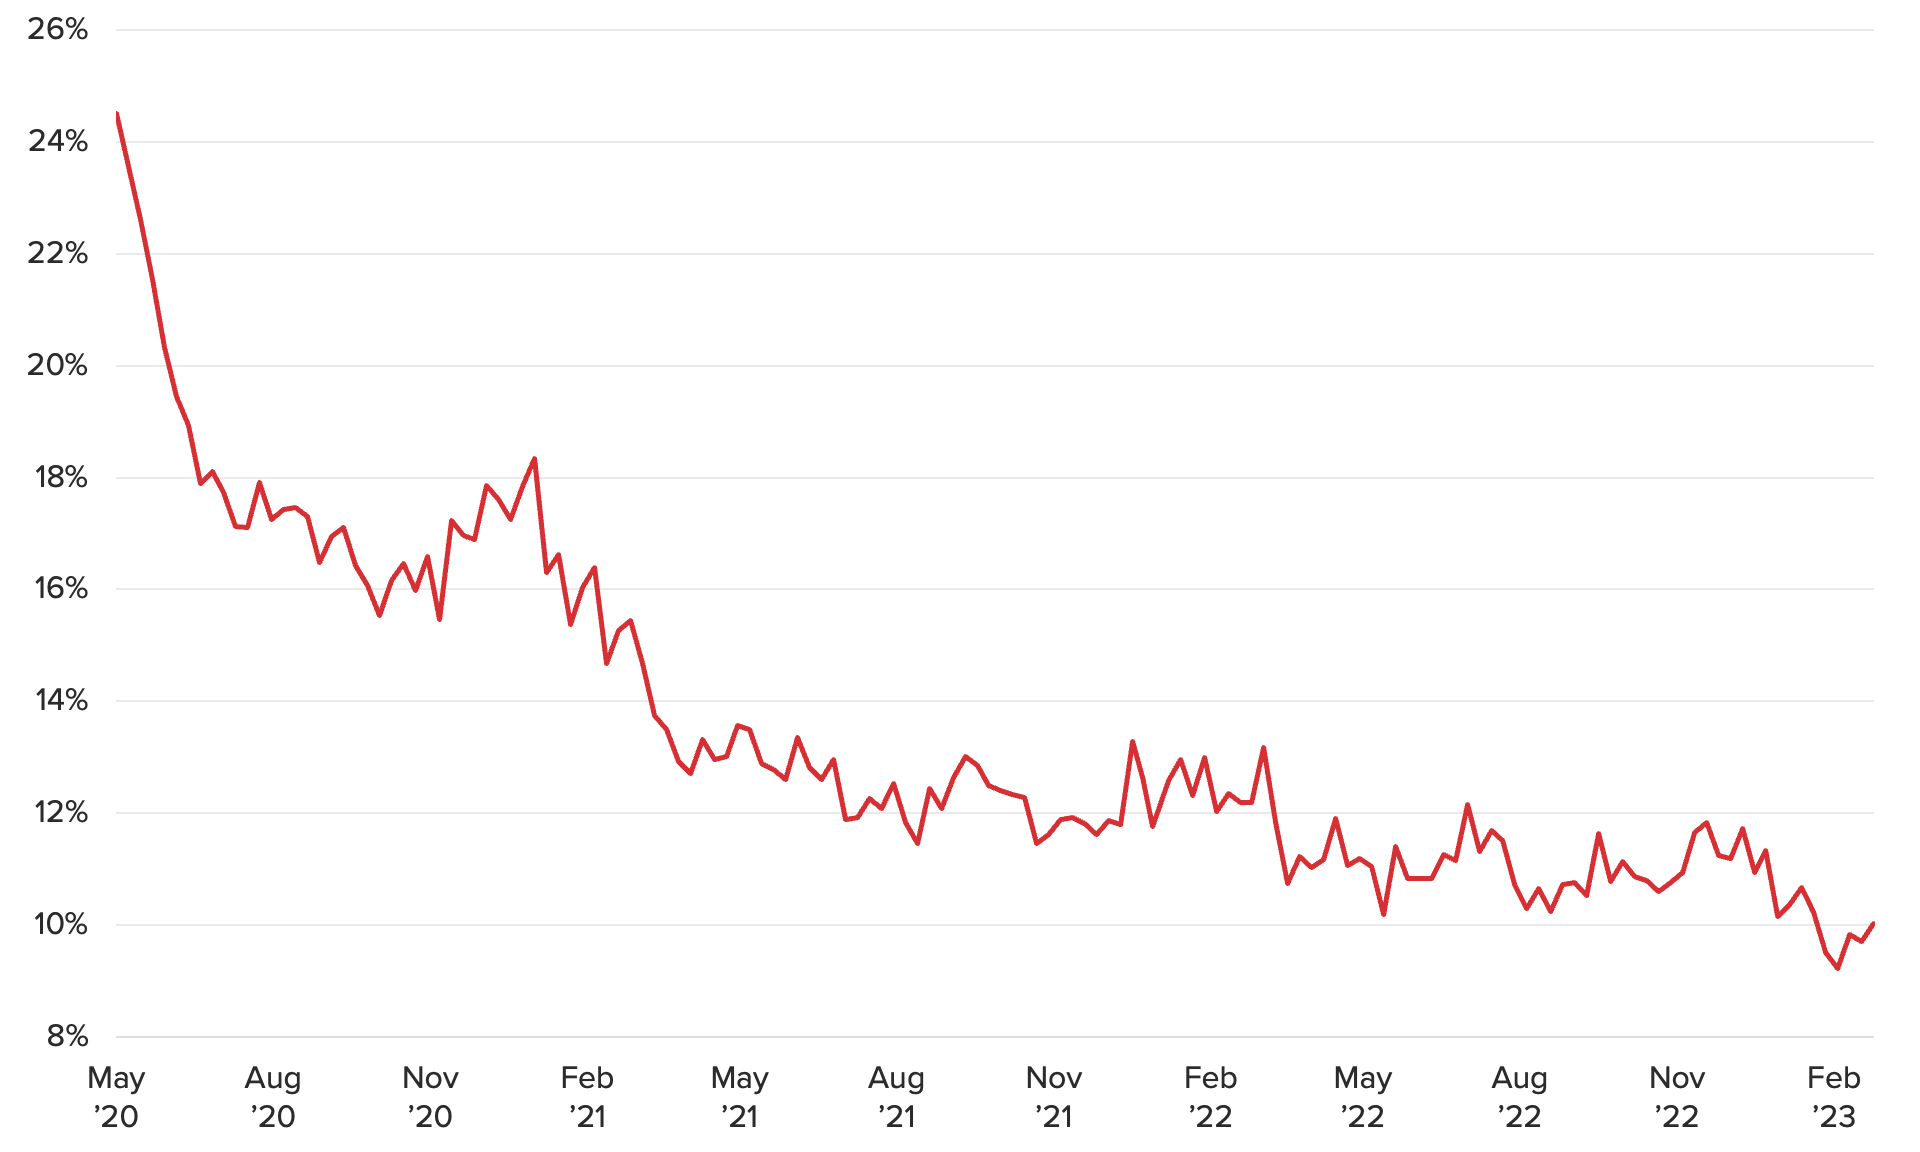 The Share of Americans Reporting Lost Pay Hit a New Series Low in February